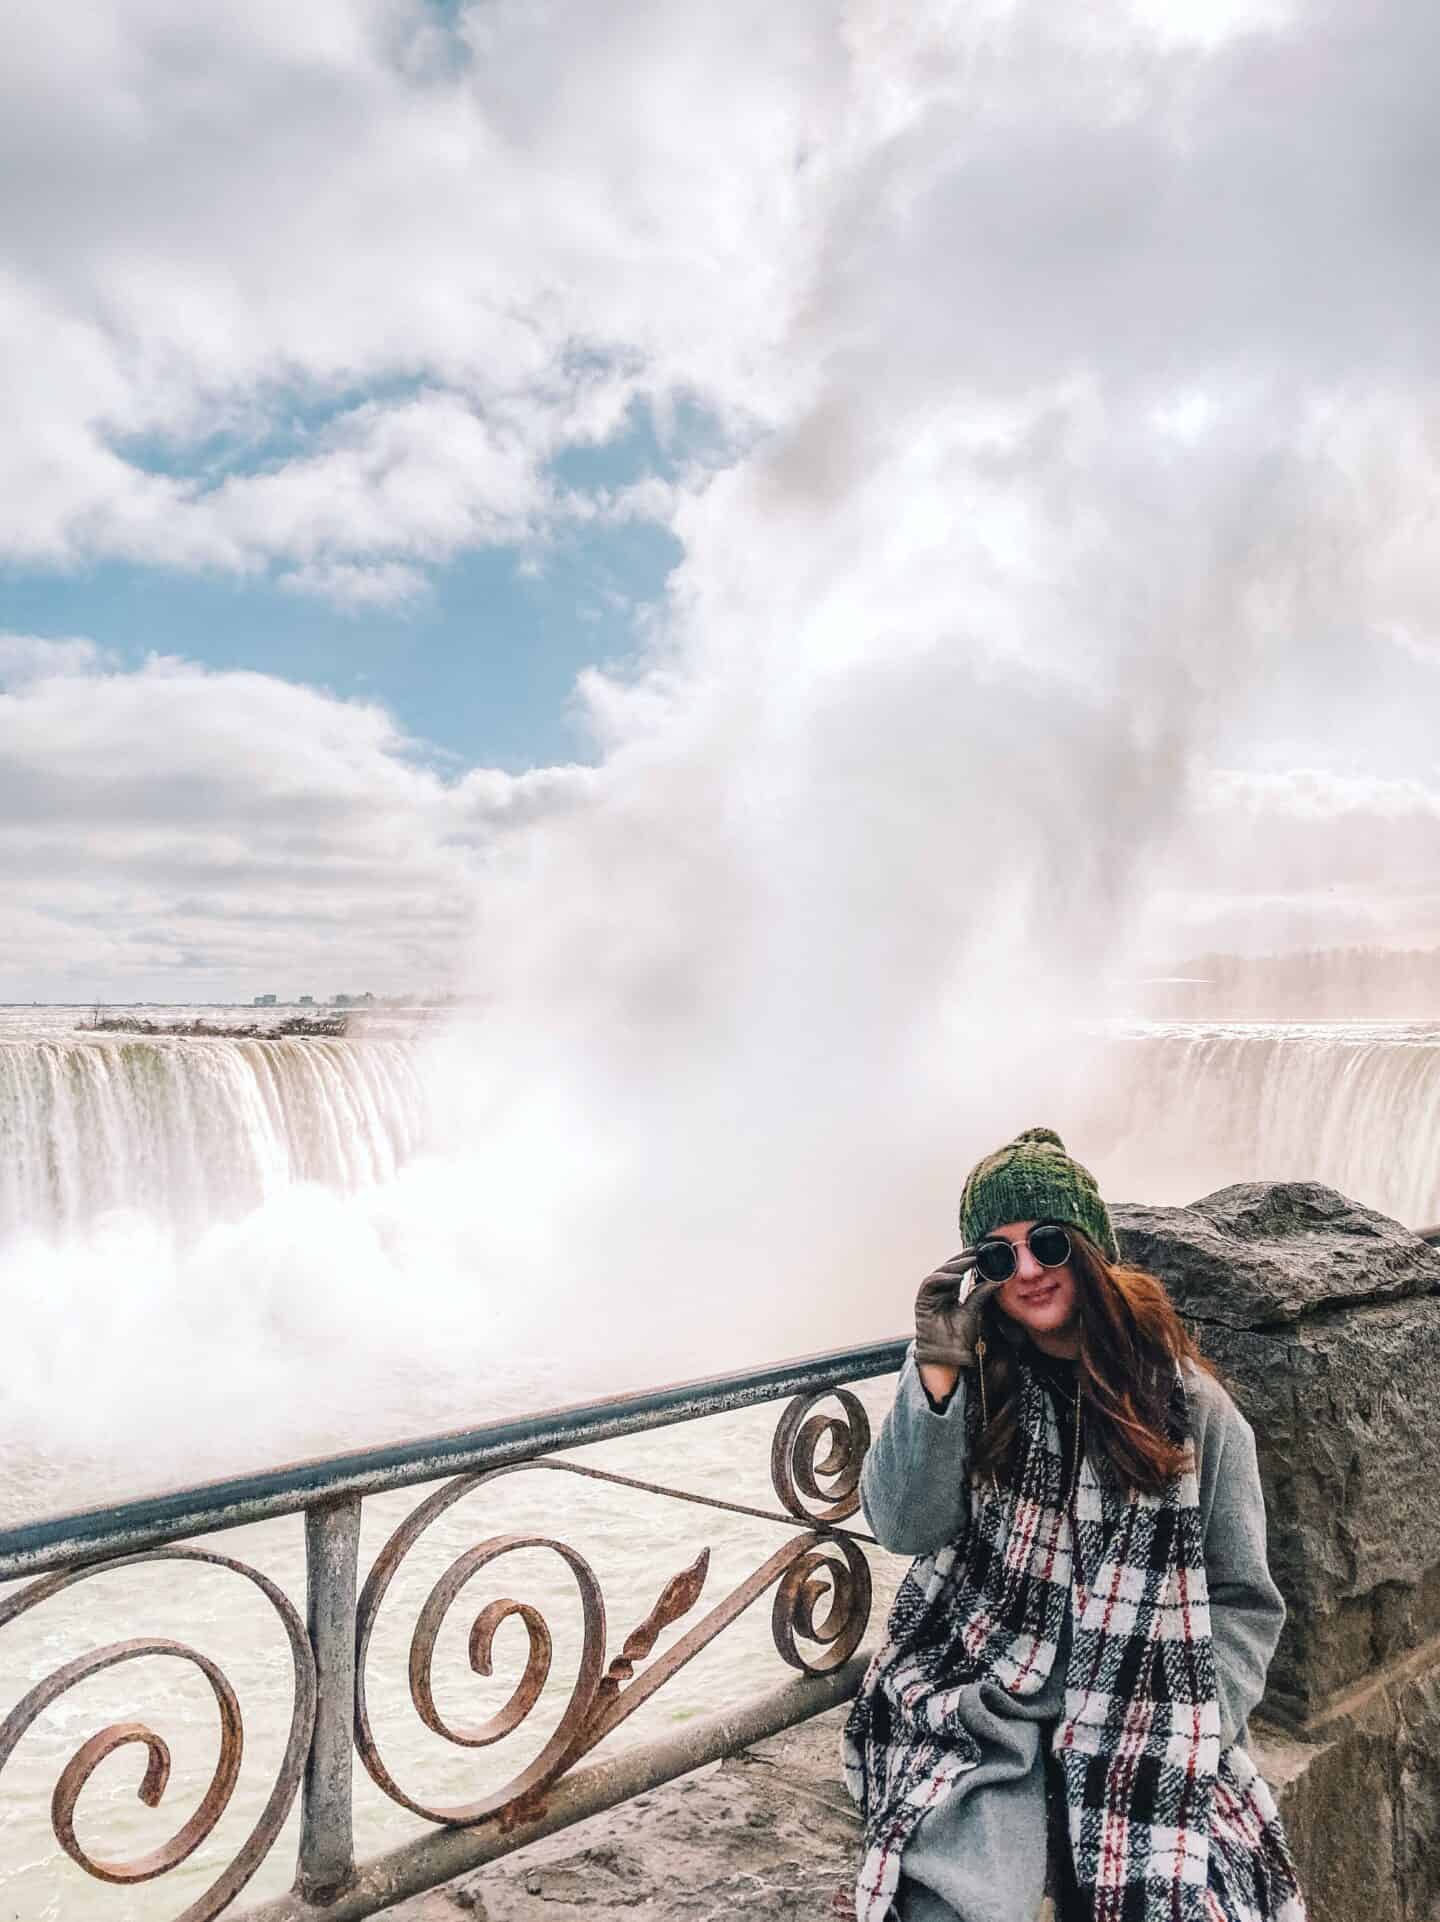 Enjoying the views at Niagara Falls needs to be added to your 4 day Toronto itinerary